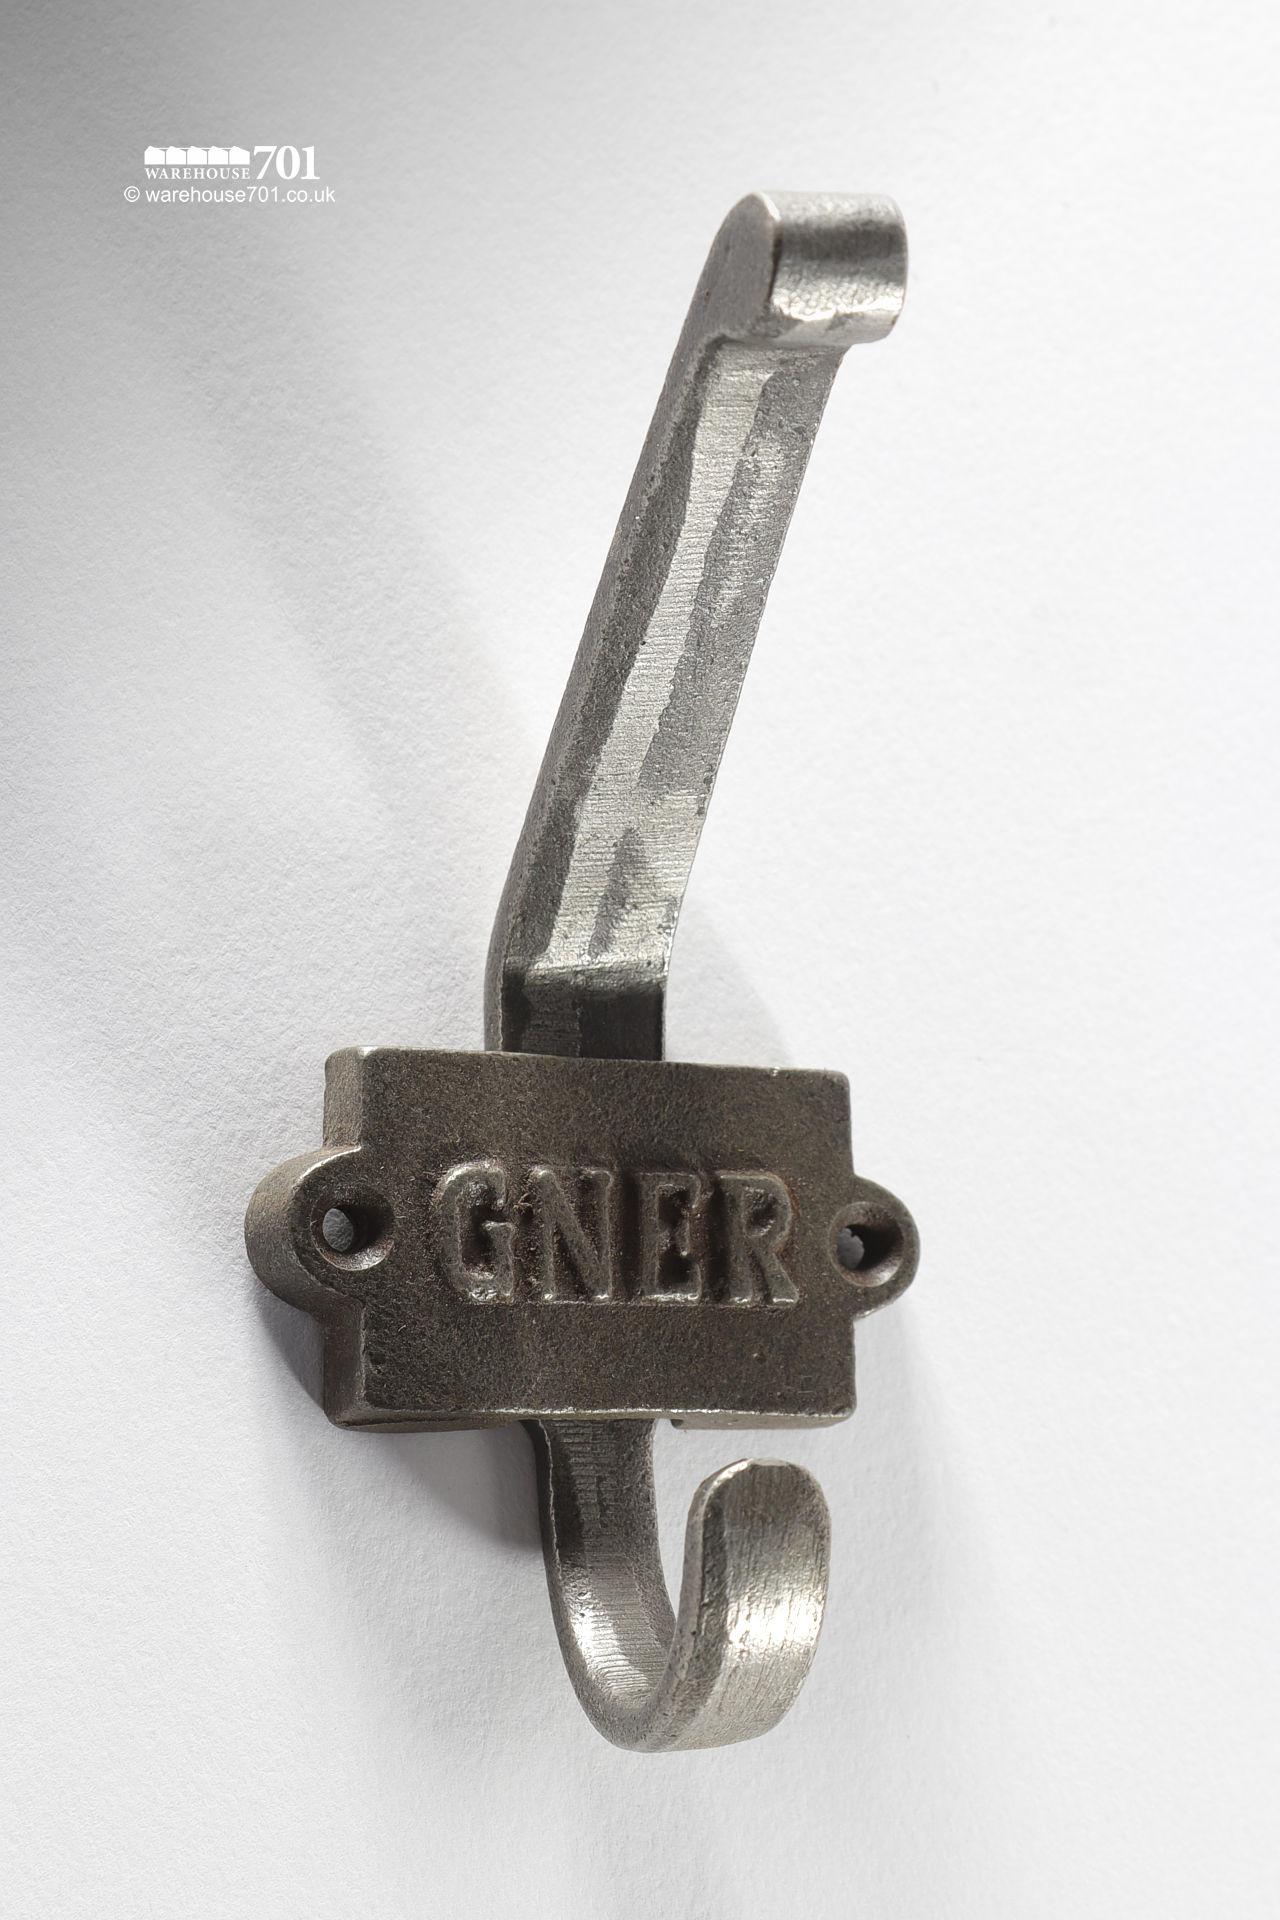 New Cast Iron Double Coat Hook with GNER Plaque or Plate